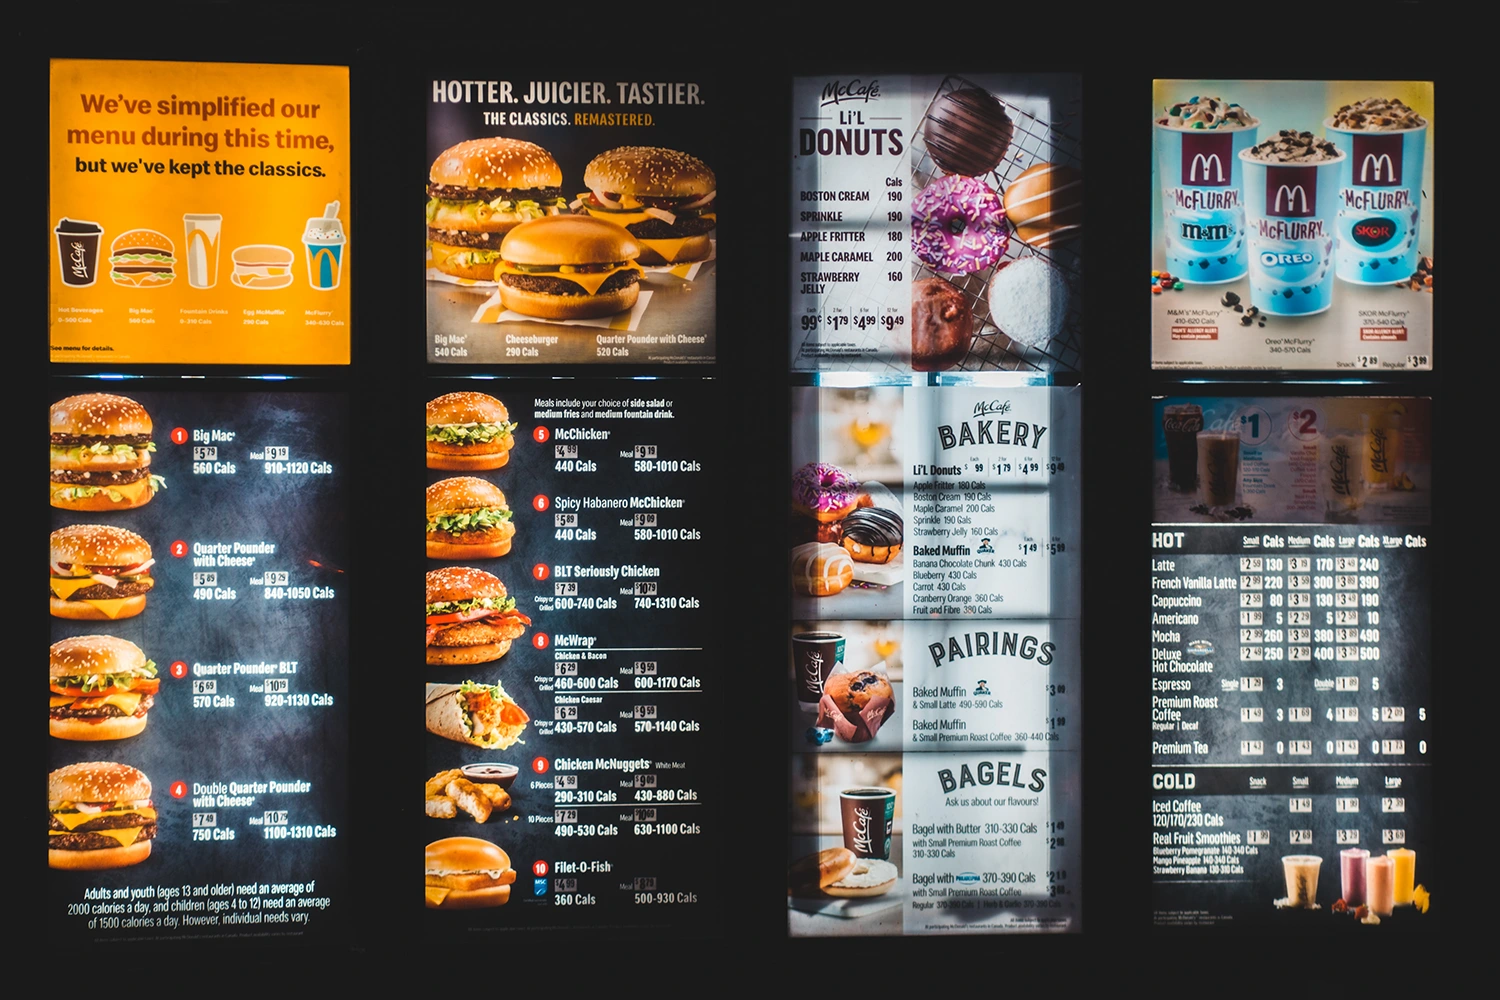 This digital menu board from McDonald's illustrates how companies can use digital menus to promote higher-priced offerings and specials.